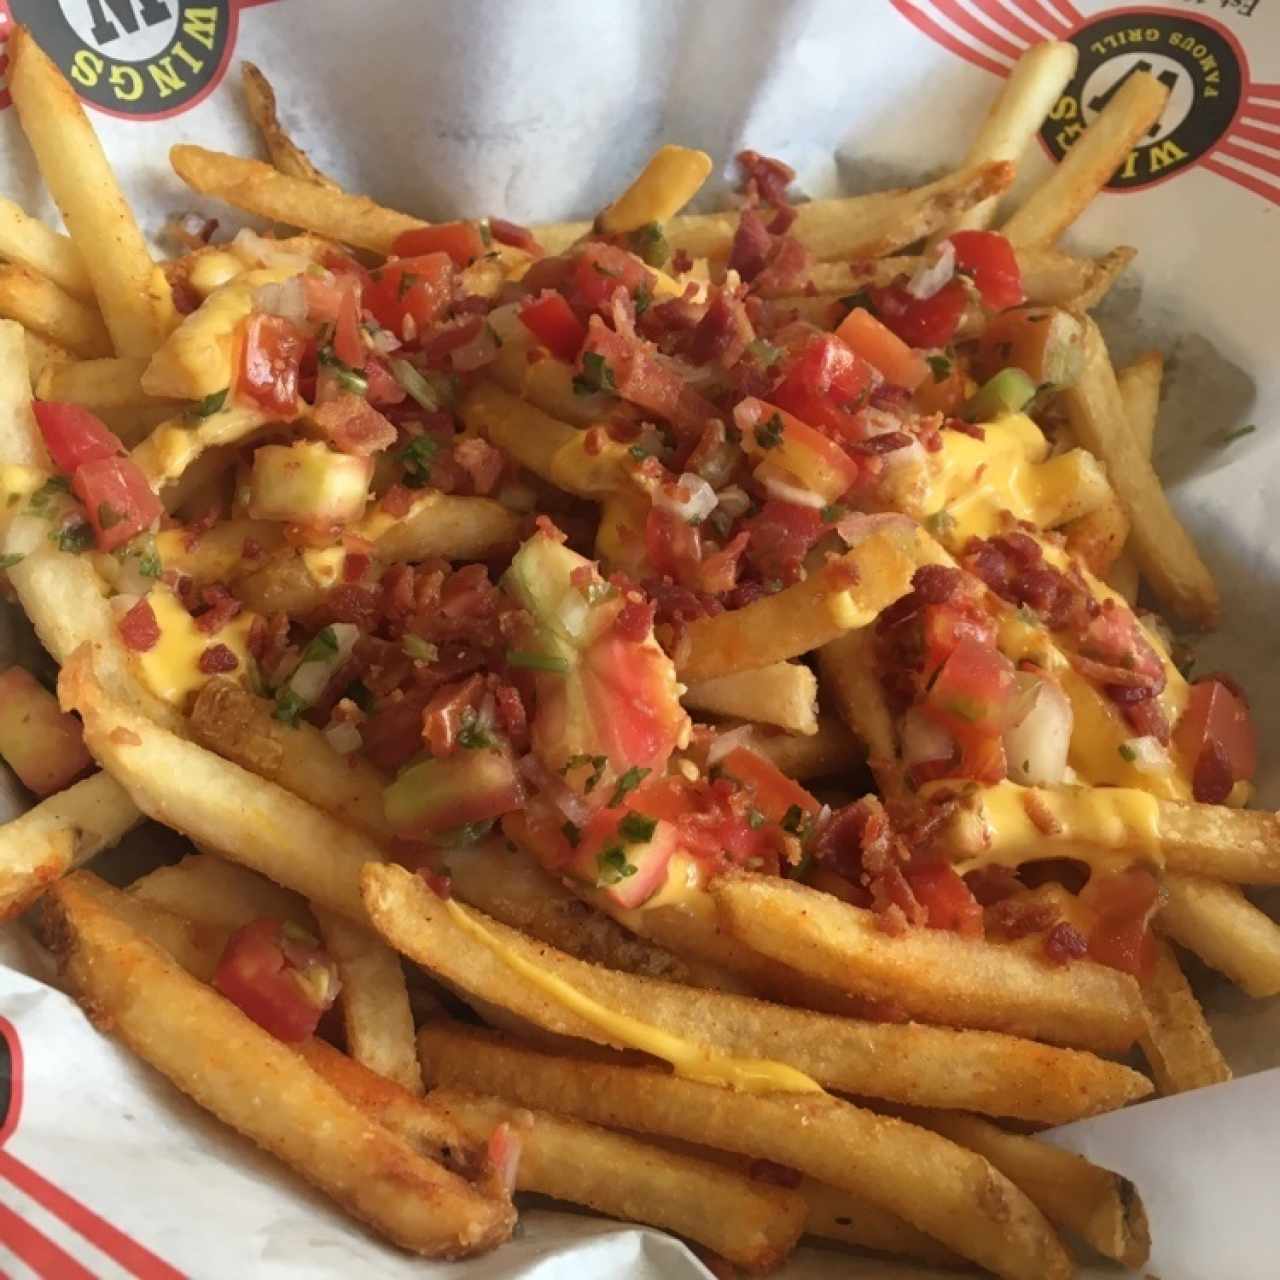 Bacon fries